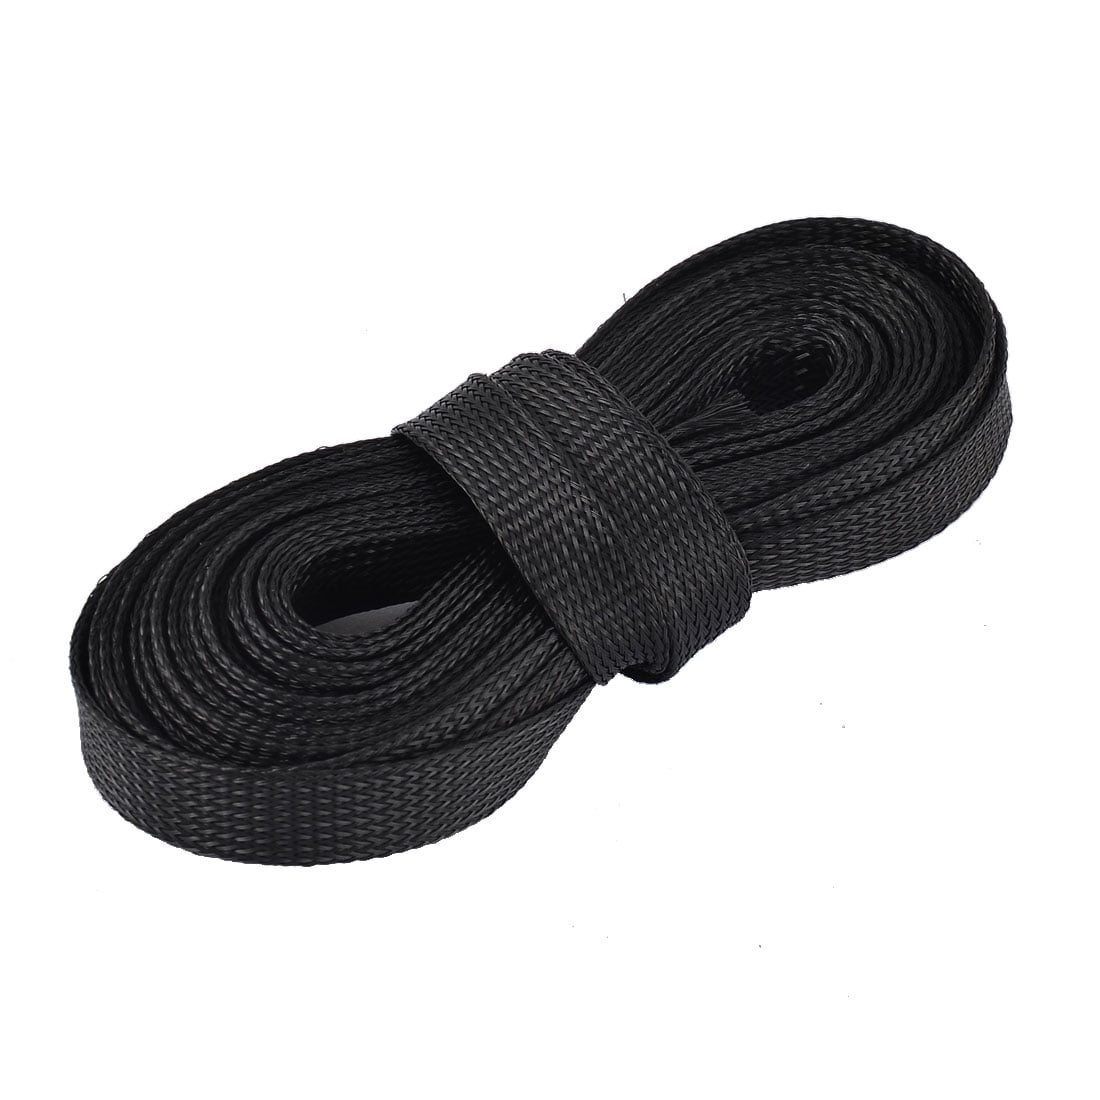 16mm Black Braided Cable Sleeving Expandable Wire Harness Marine Auto Sheathing